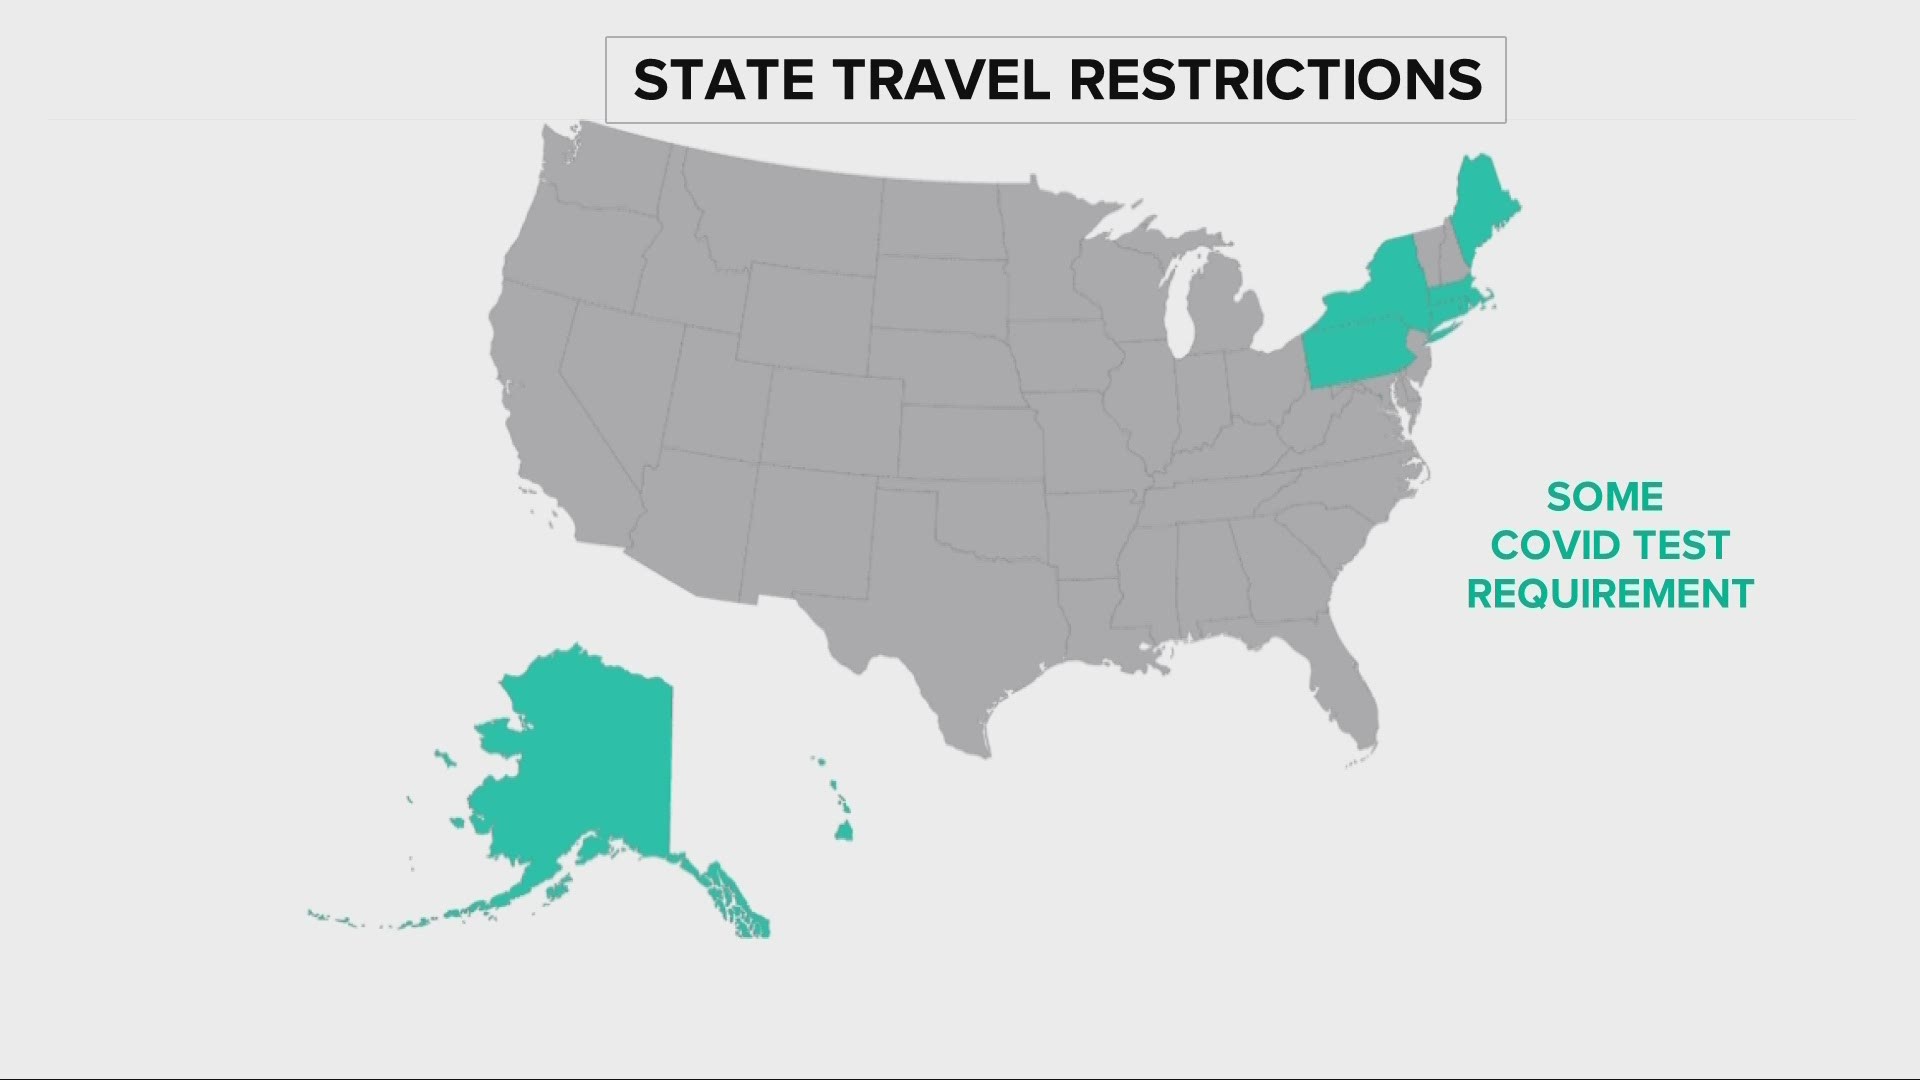 More states are placing travel restrictions due to COVID-19, requiring a negative test or quarantine. Where do you go to get tested if you don't have symptoms?